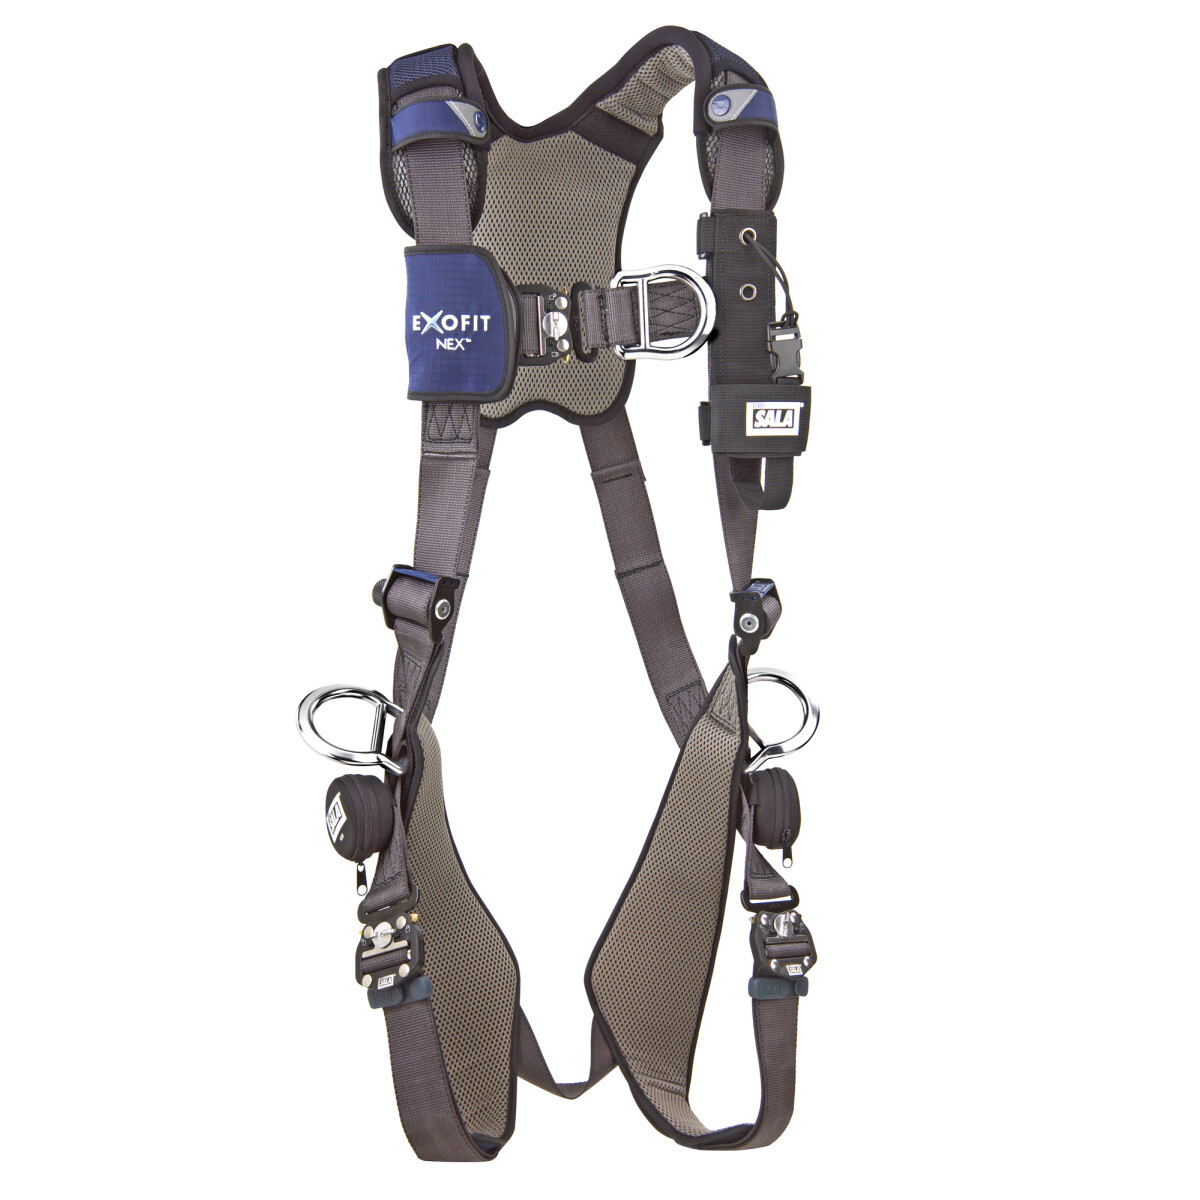 3M™ DBI-SALA® Large ExoFit NEX™ Full Body/Vest Style Harness With Tech-Lite™ Aluminum Back, Front And Side D-Ring, Duo-Lok™ Quic